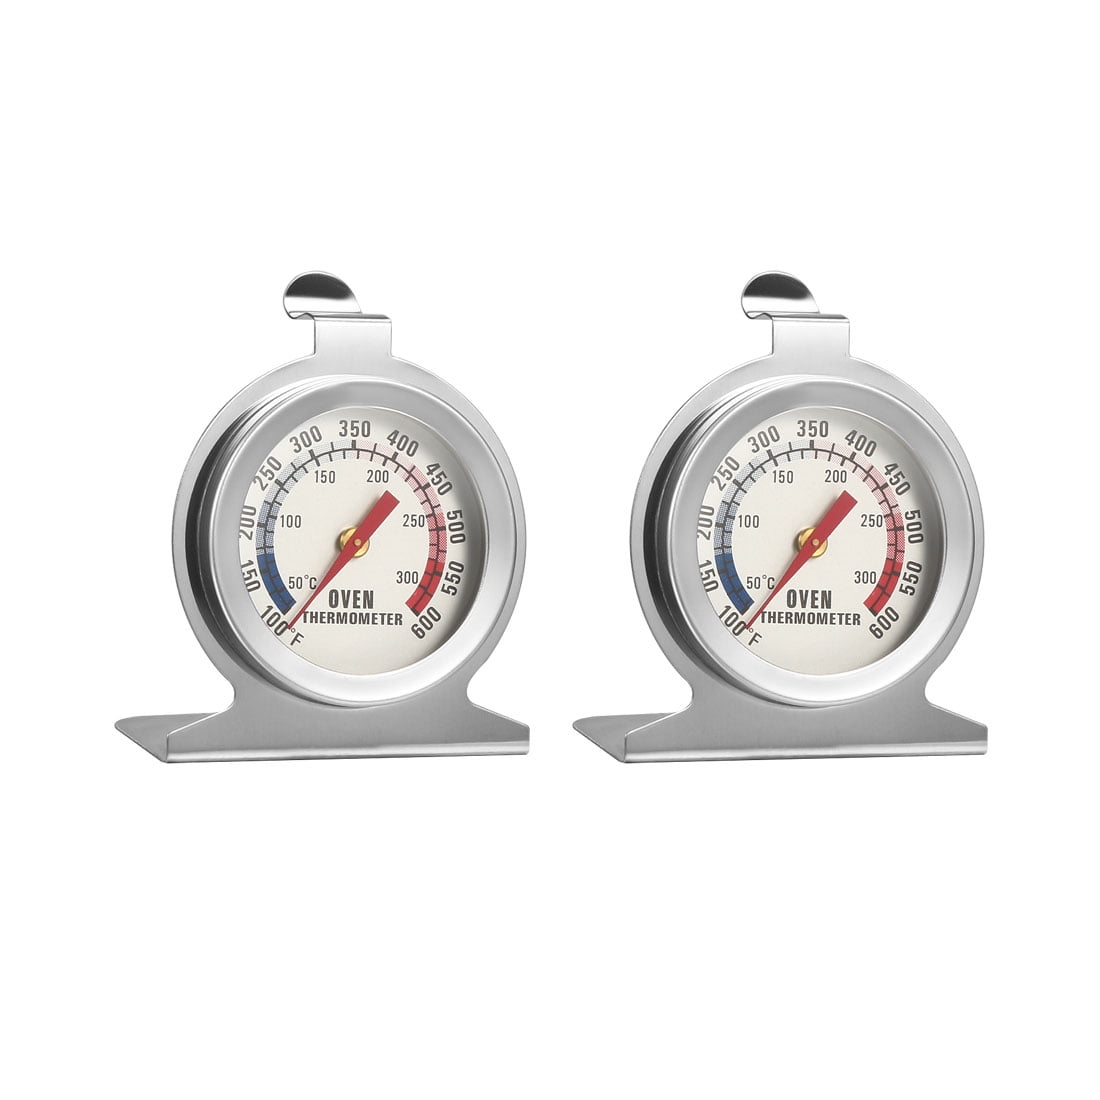 Steel Oven Cooker Thermometer Temperature Gauge Quality K0I3 300ºC S9O7